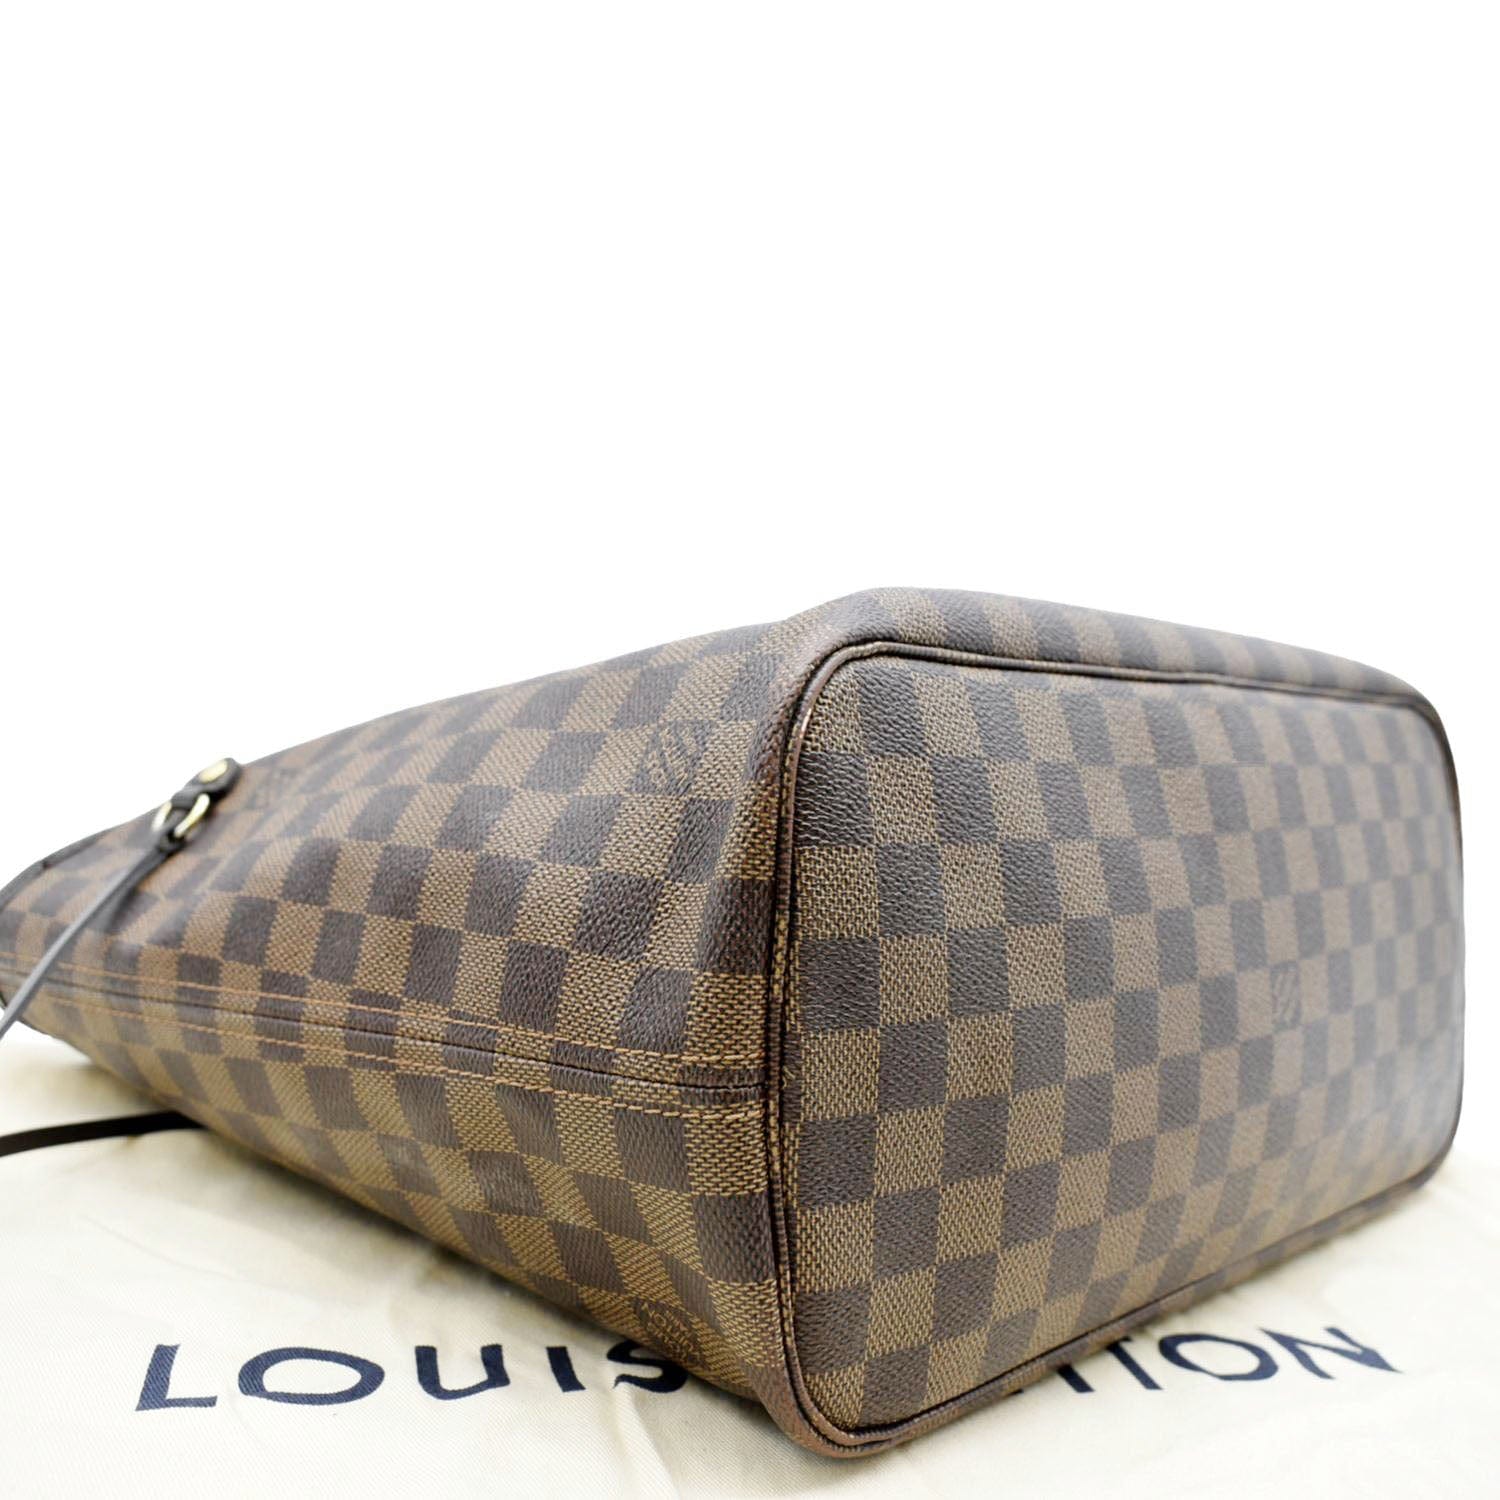 Louis Vuitton Damier Ebene Ballerine Neverfull mm Tote Bag with Pouch 73lv225sW, Women's, Size: One Size